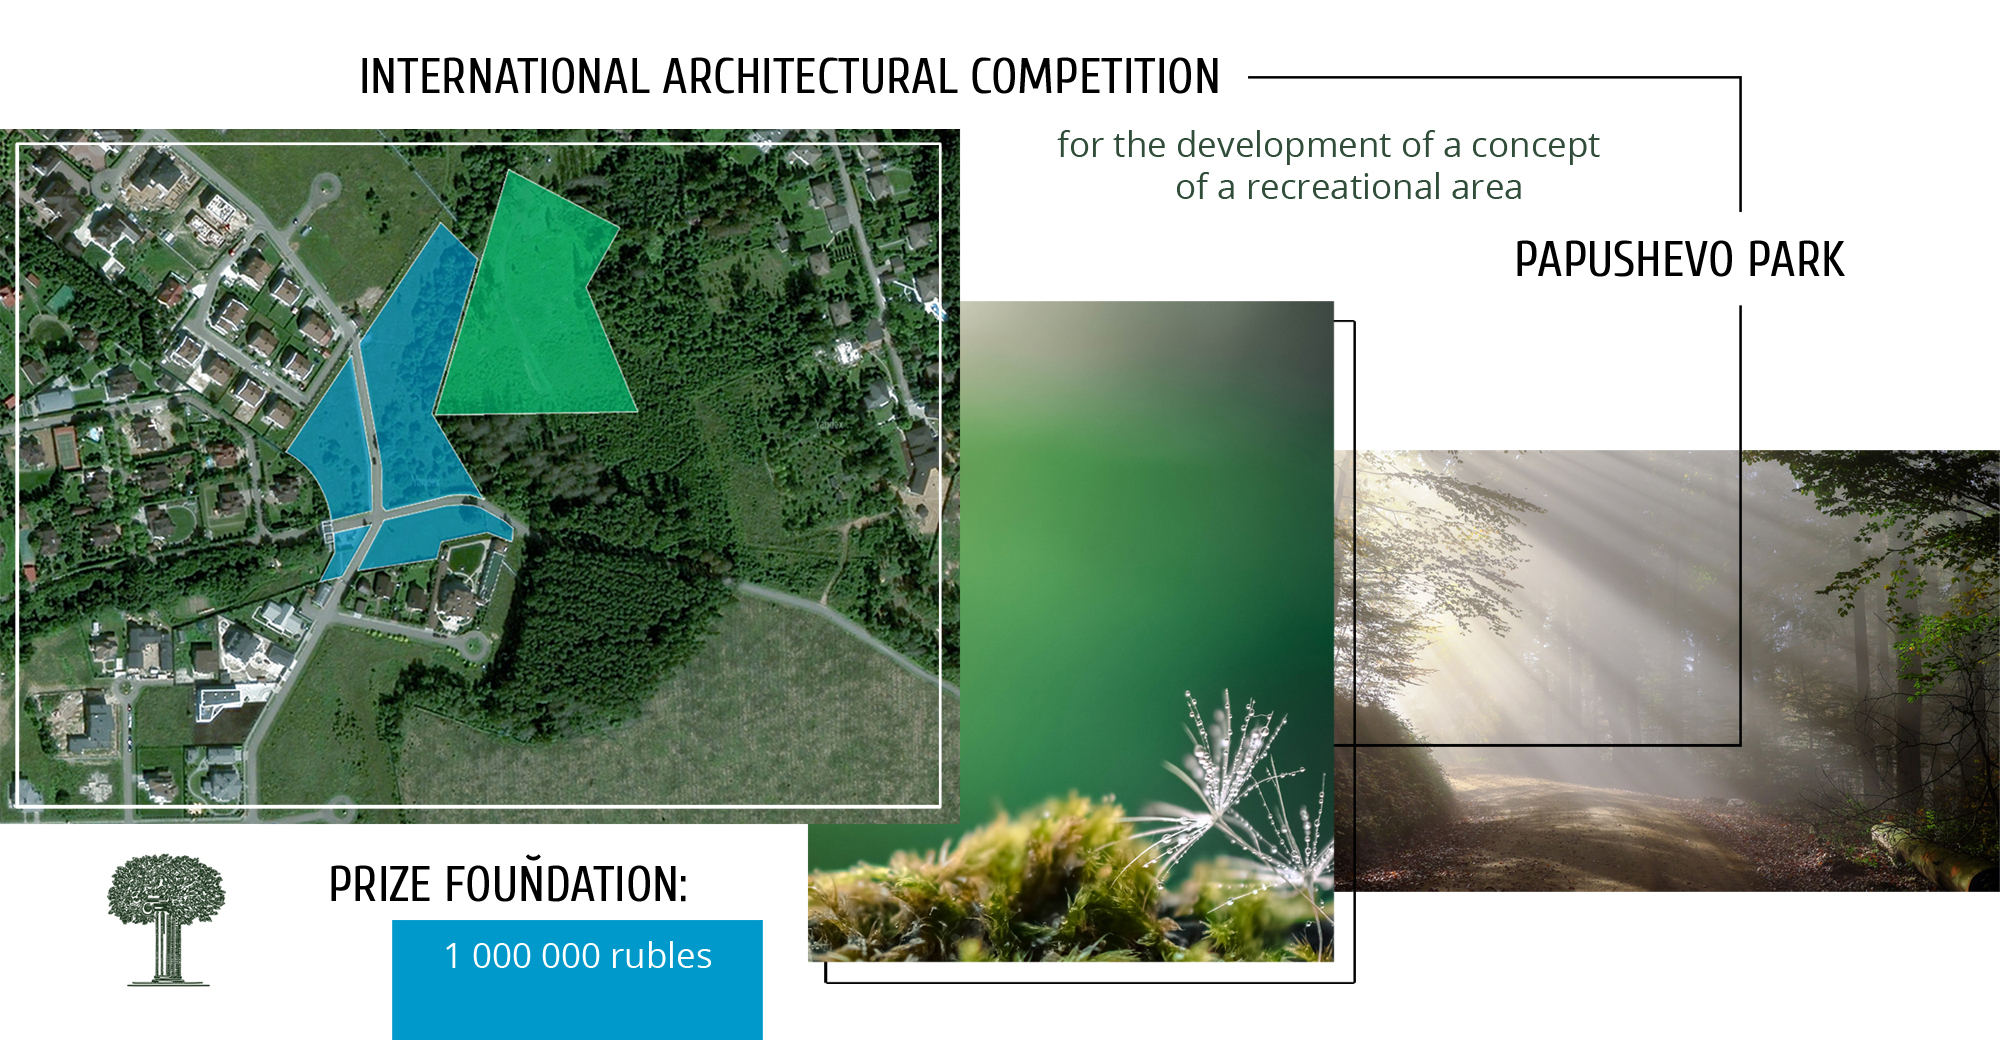 International architectural competition for the development of the concept of the recreational territory of Papushevo Park. The prize fund is 1 million rubles